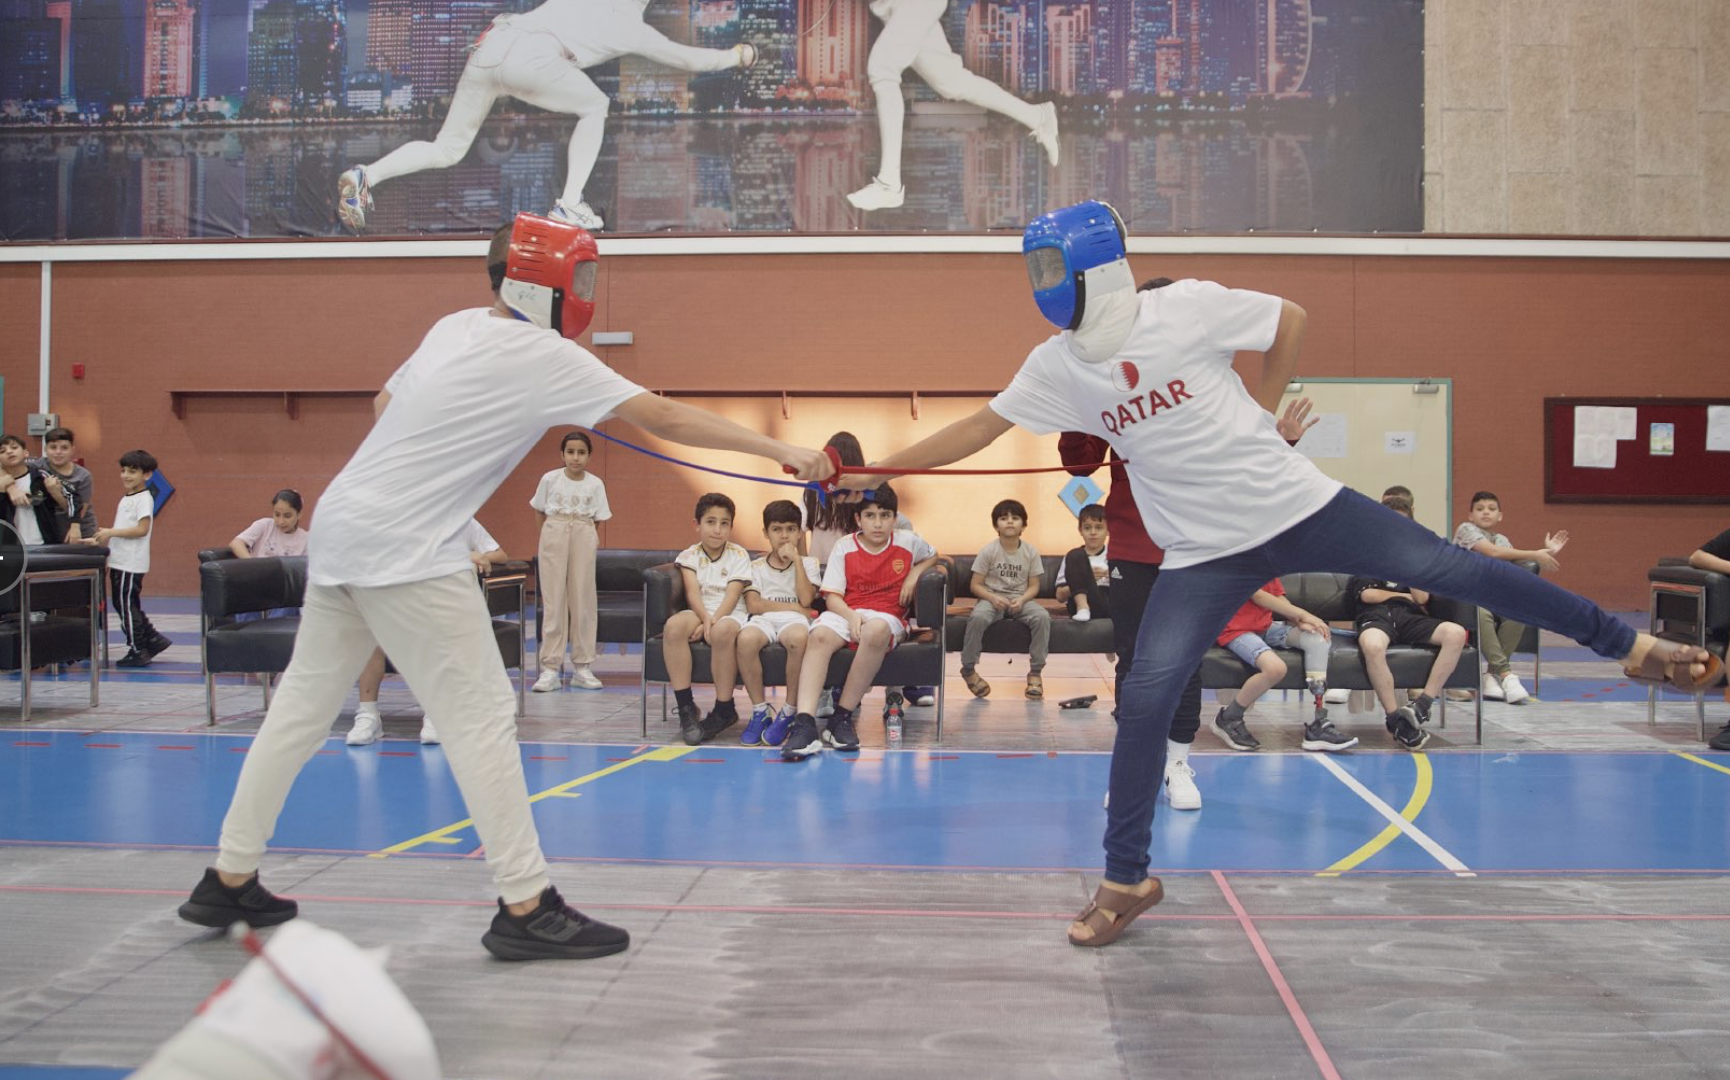 Olympic Committee hosts fencing festival inviting Gaza’s evacuees in Qatar